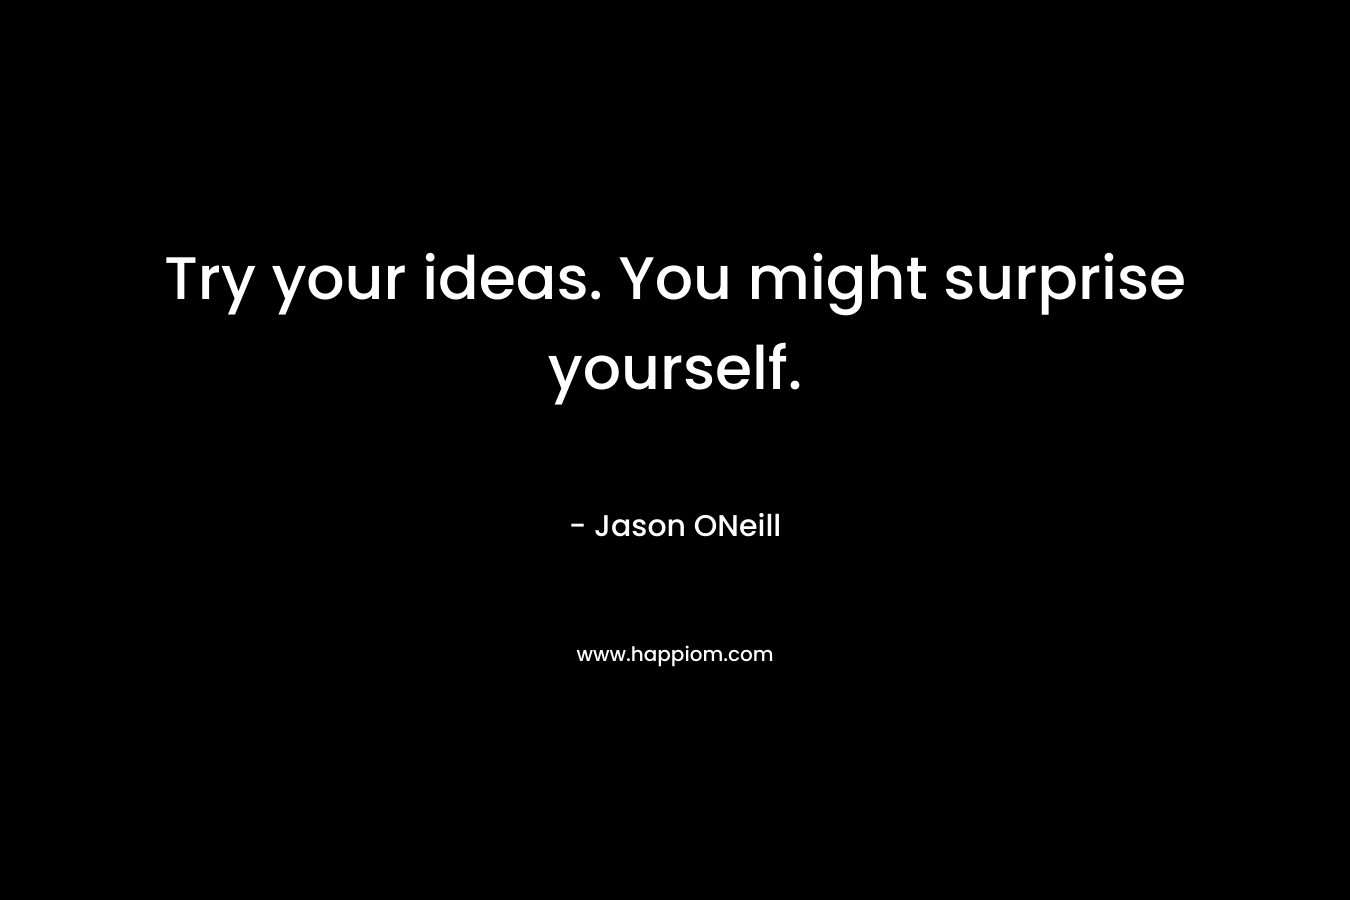 Try your ideas. You might surprise yourself.